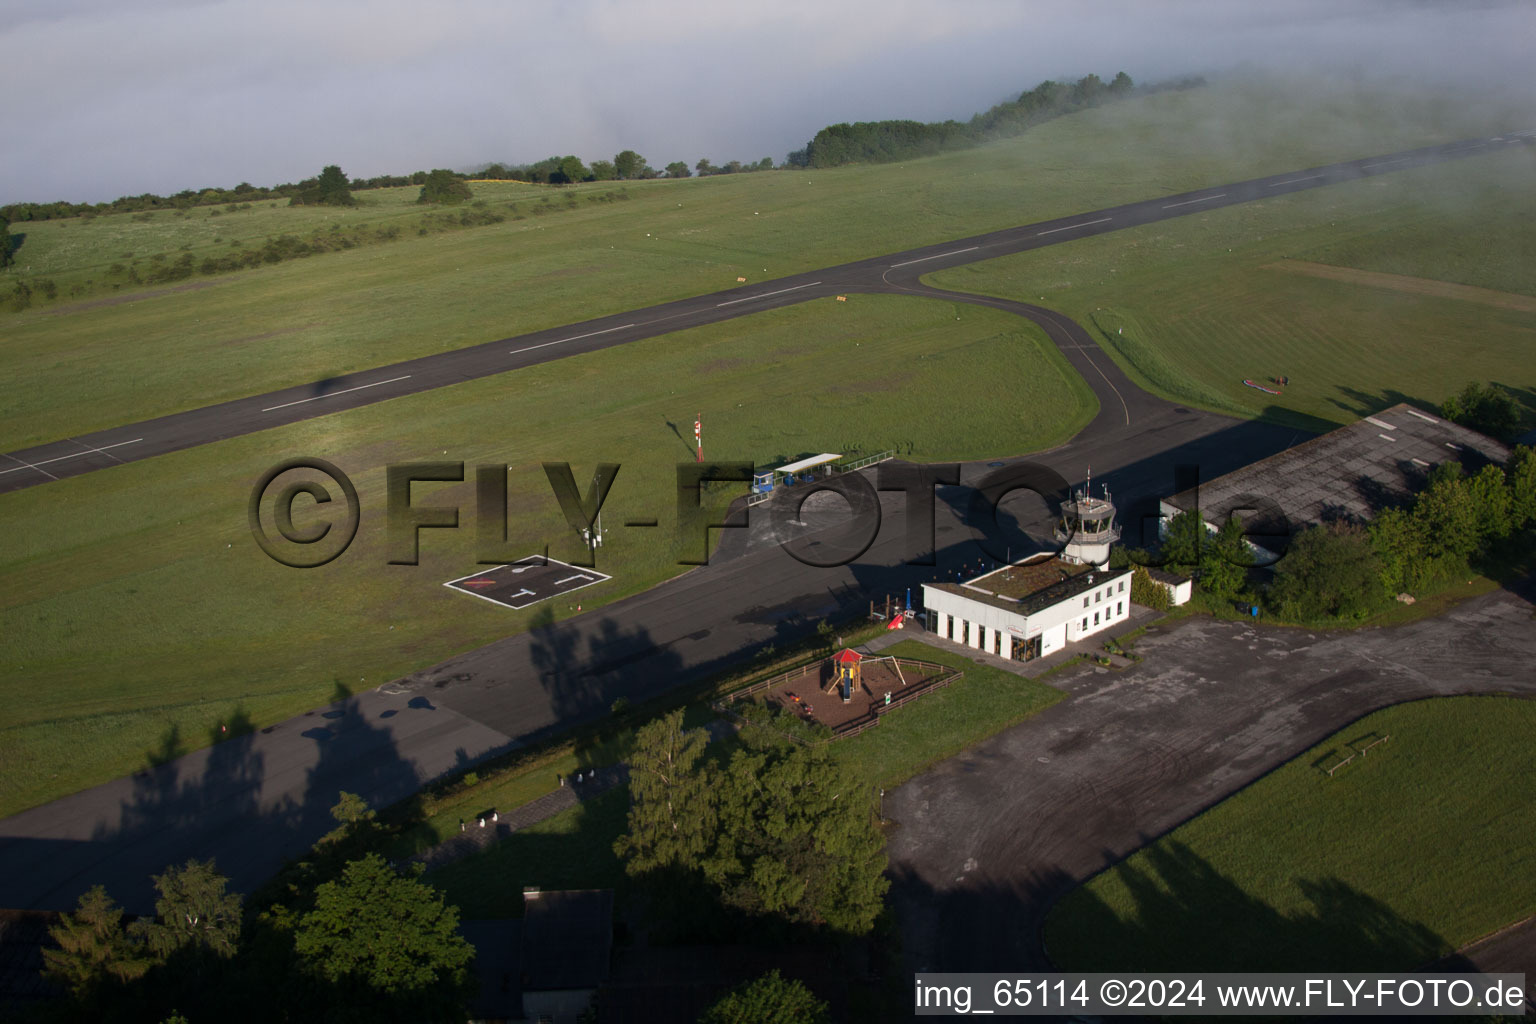 Runway with tarmac terrain of airfield Hoexter-Holzminden with morning mist in the district Brenkhausen in Hoexter in the state North Rhine-Westphalia, Germany